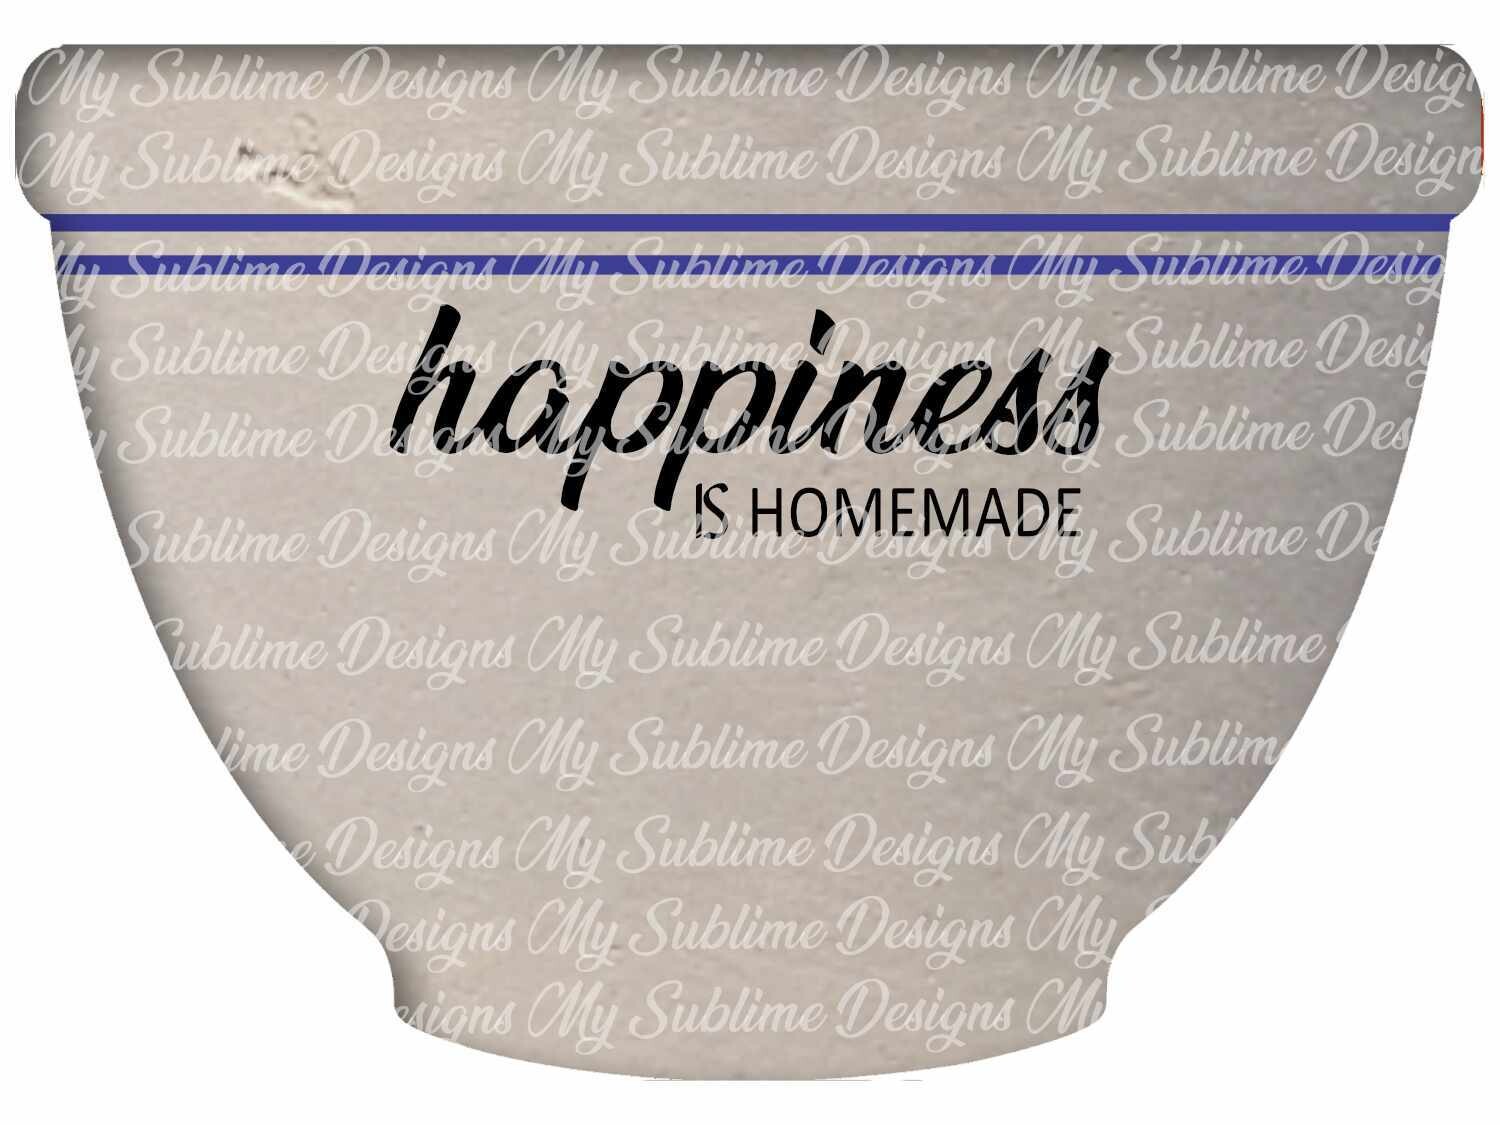 Old Fashion Crock Bowl Designs Created to fit Our Unisub Sublimation Bowl Blanks DIGITAL DESIGN ONLY